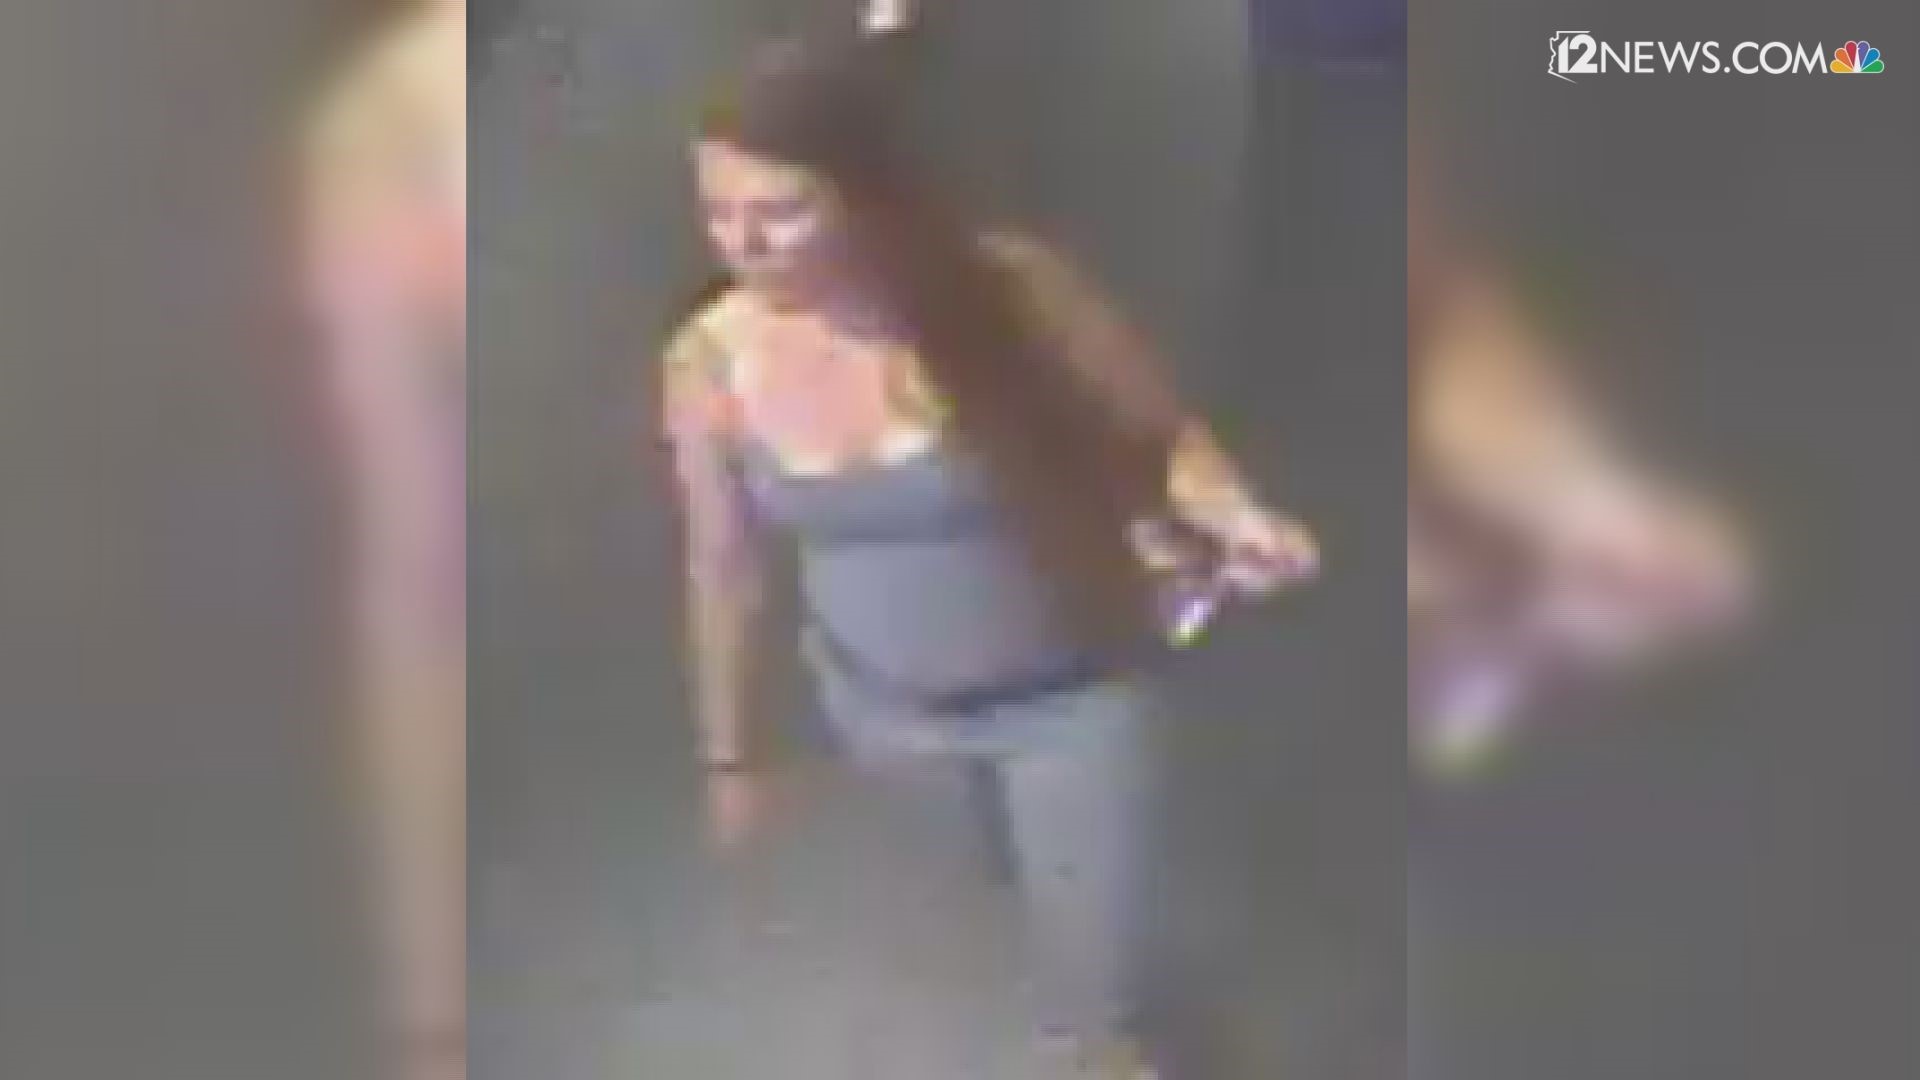 A woman is seen in surveillance video grabbing keys that are not hers from a gym key board and exiting the gym. She stole a 2015 red Scion TC from the gym parking lot. The suspect is described as a white female, 25-30 years old, brown hair, wearing gray spandex top, and bottom. If you have any information call Silent Witness. There is $1000 reward.